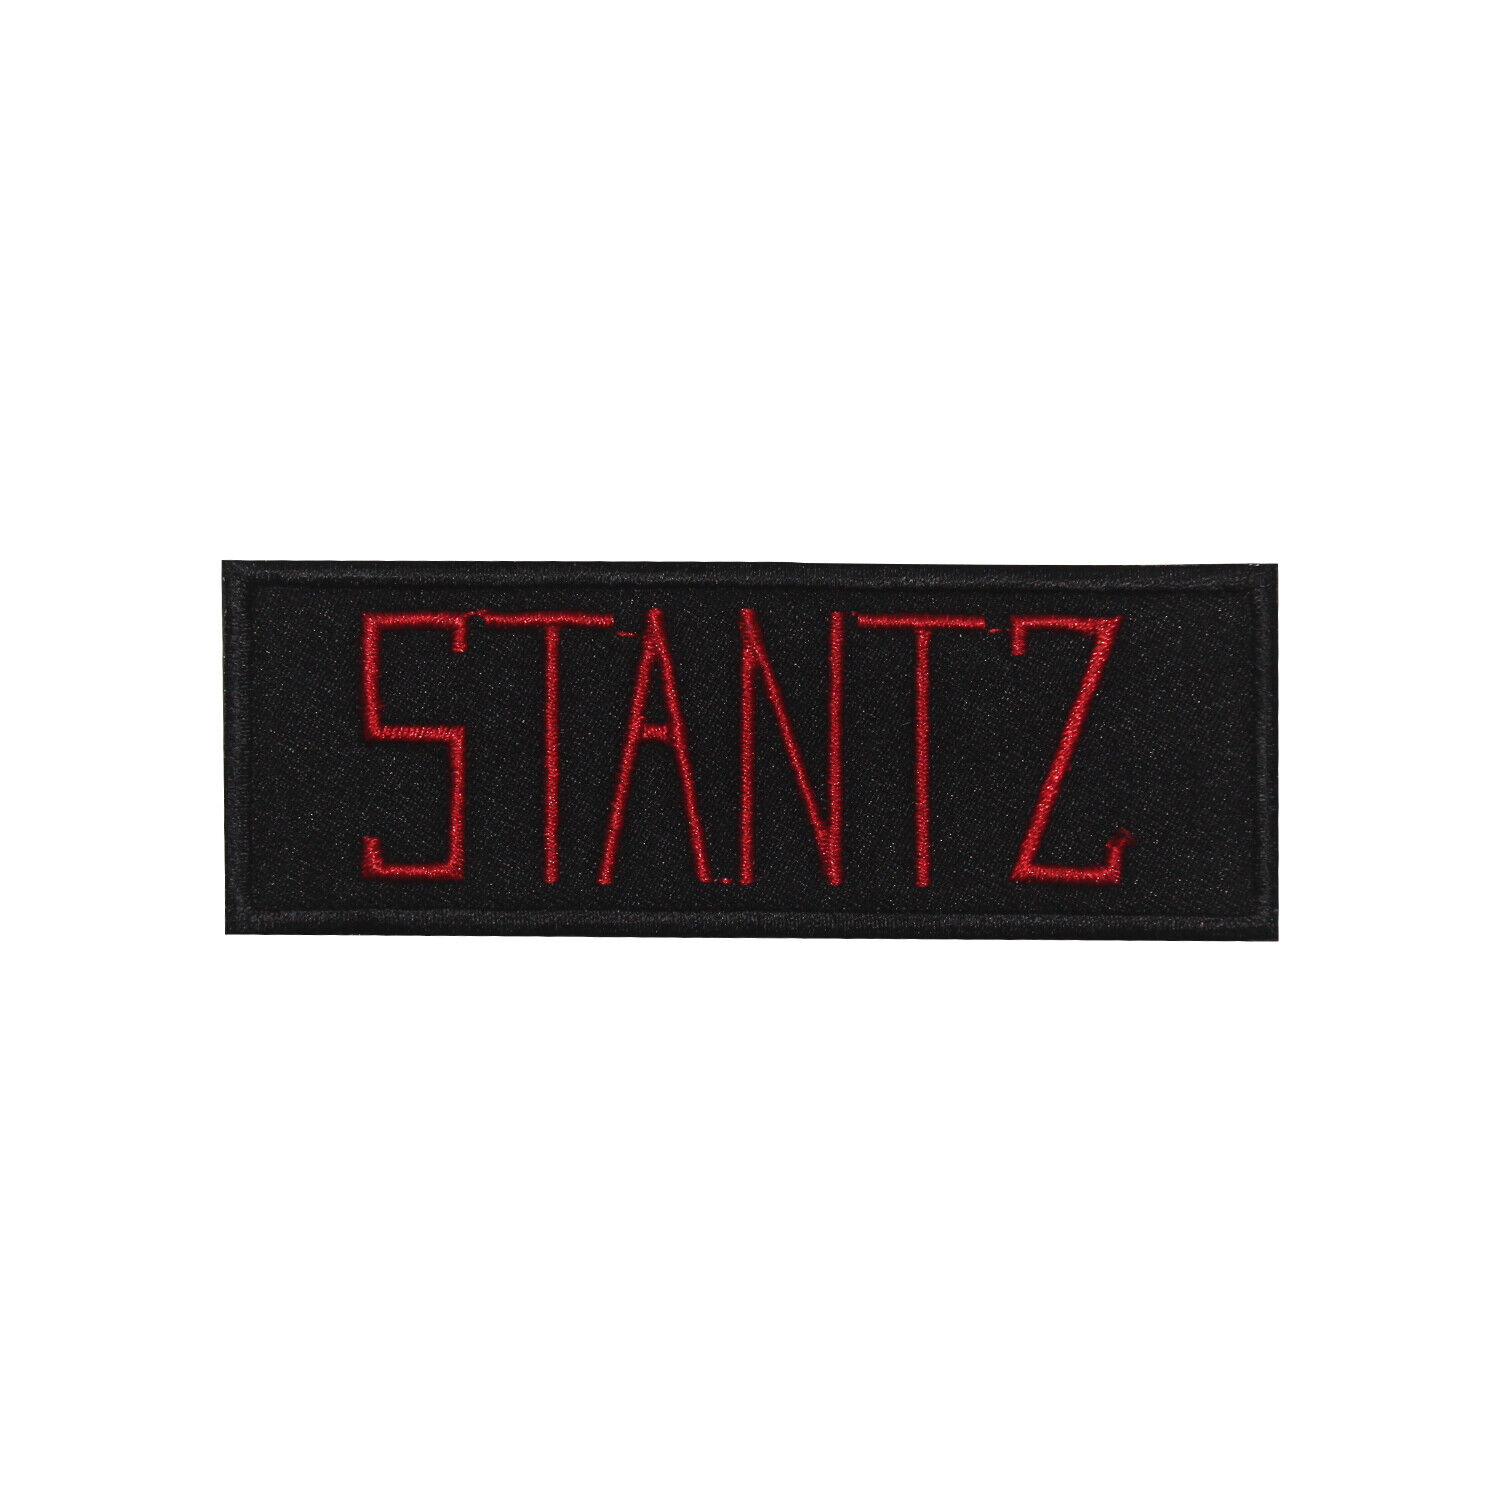 STANTZ Words Slogan Patch Iron On Sew On Badge Embroidered Patch 